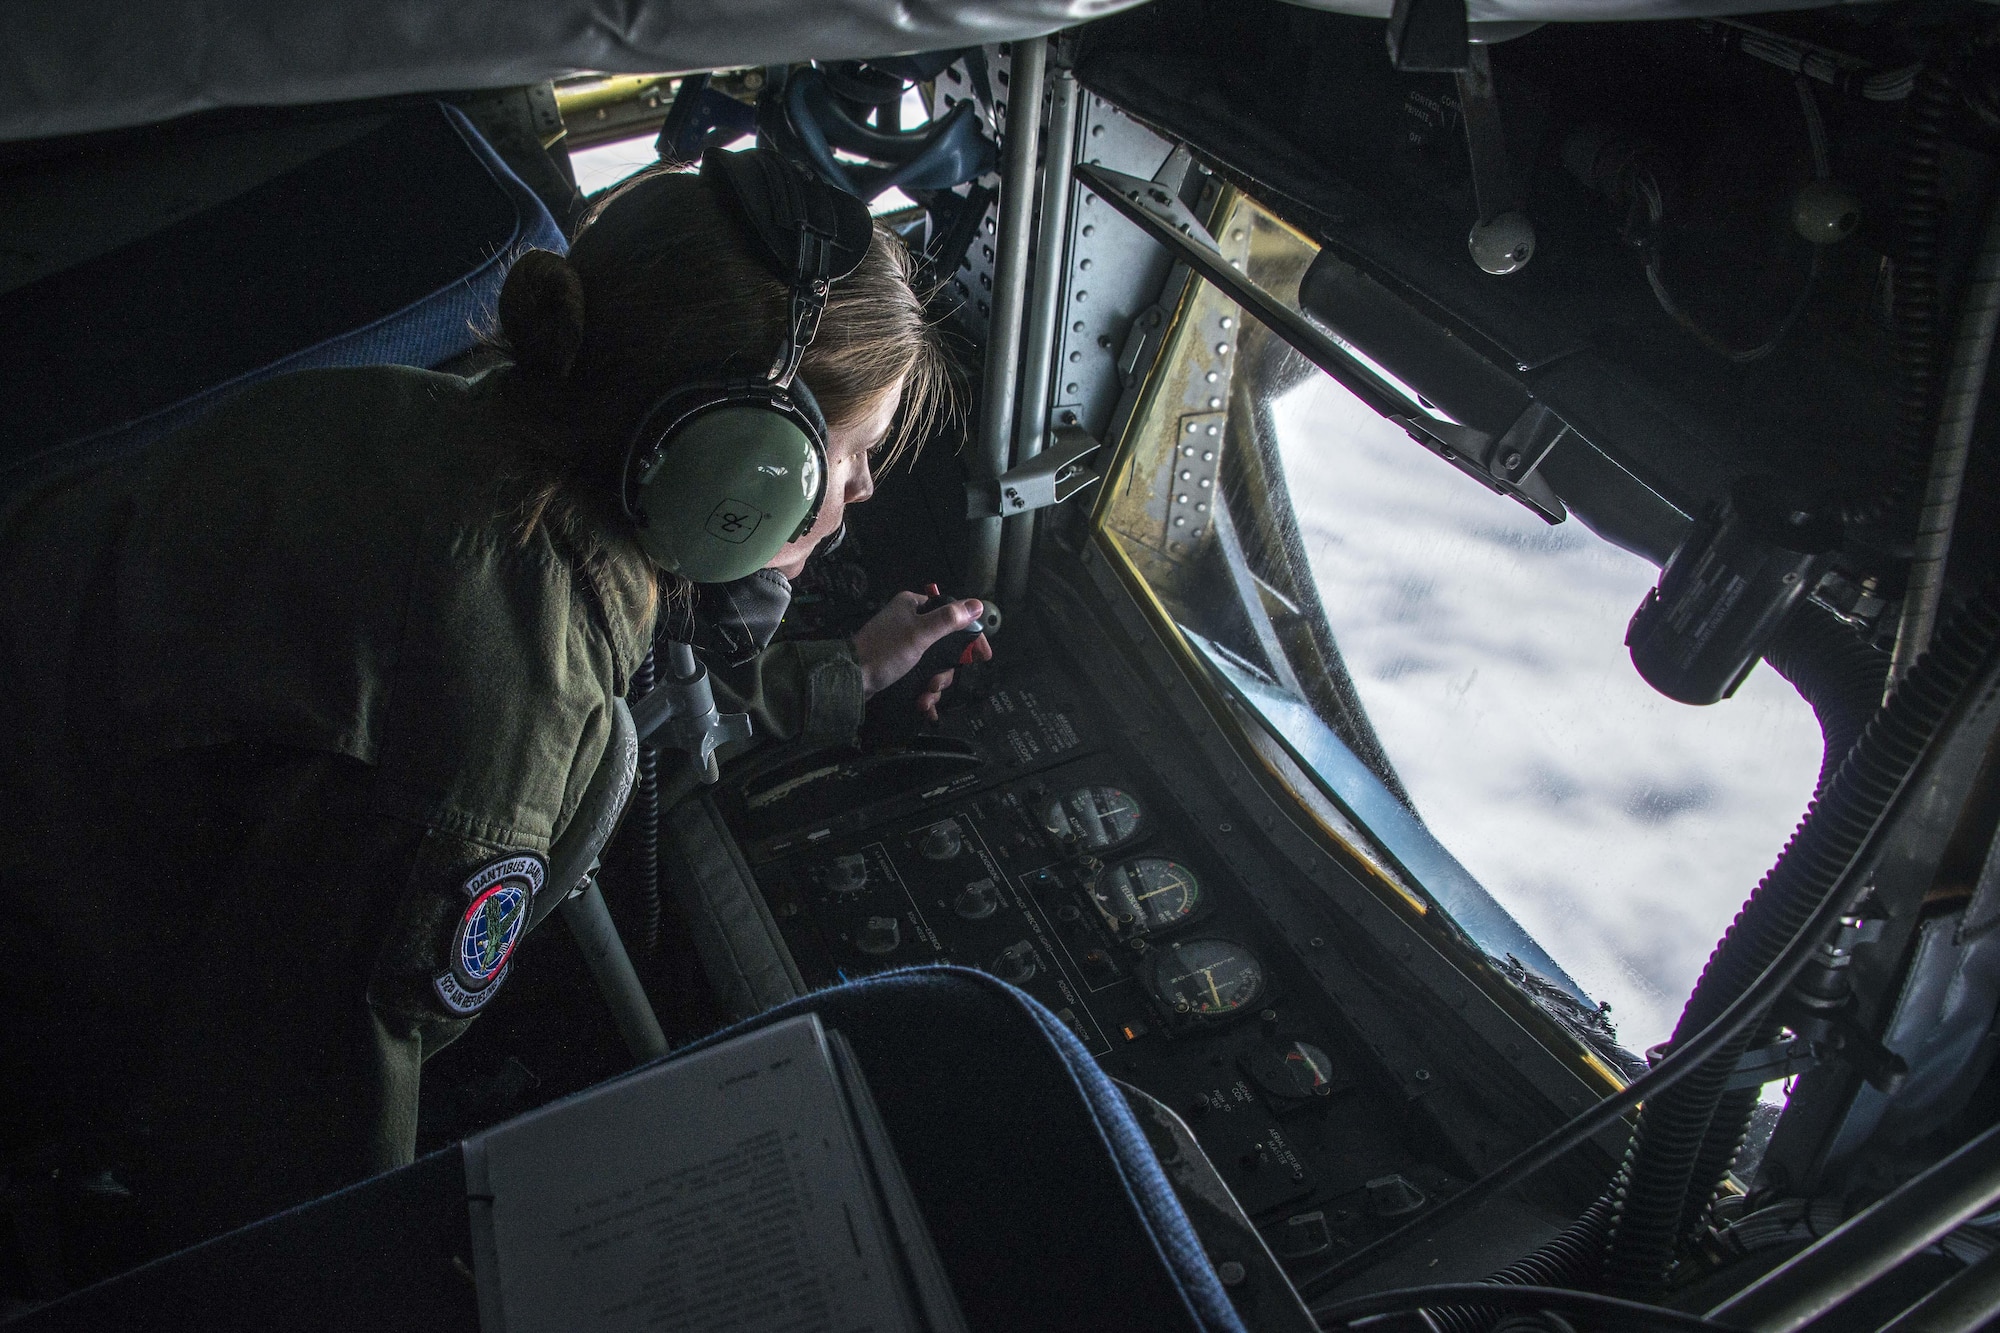 Staff Sgt. Shawna Sims connects with an F-22 Raptor fighter for aerial refueling over British Columbia, Canada, during exercise Amalgam Dart 15-2 at Eielson AFB, Alaska, May 27, 2015. The exercise spanned two forward operating locations in Canada’s Northwest Territories, two U.S. Air Force bases in Alaska, and a mobile radar site in Resolute, Nunavut, as well as the skies over much of the North American Aerospace Defense Command’s area of responsibility. Sims is a 92nd Air Refueling Squadron KC-135 Stratotanker boom operator from Fairchild Air Force Base, Wash. (U.S. Air Force photo/Staff Sgt. Benjamin W. Stratton)